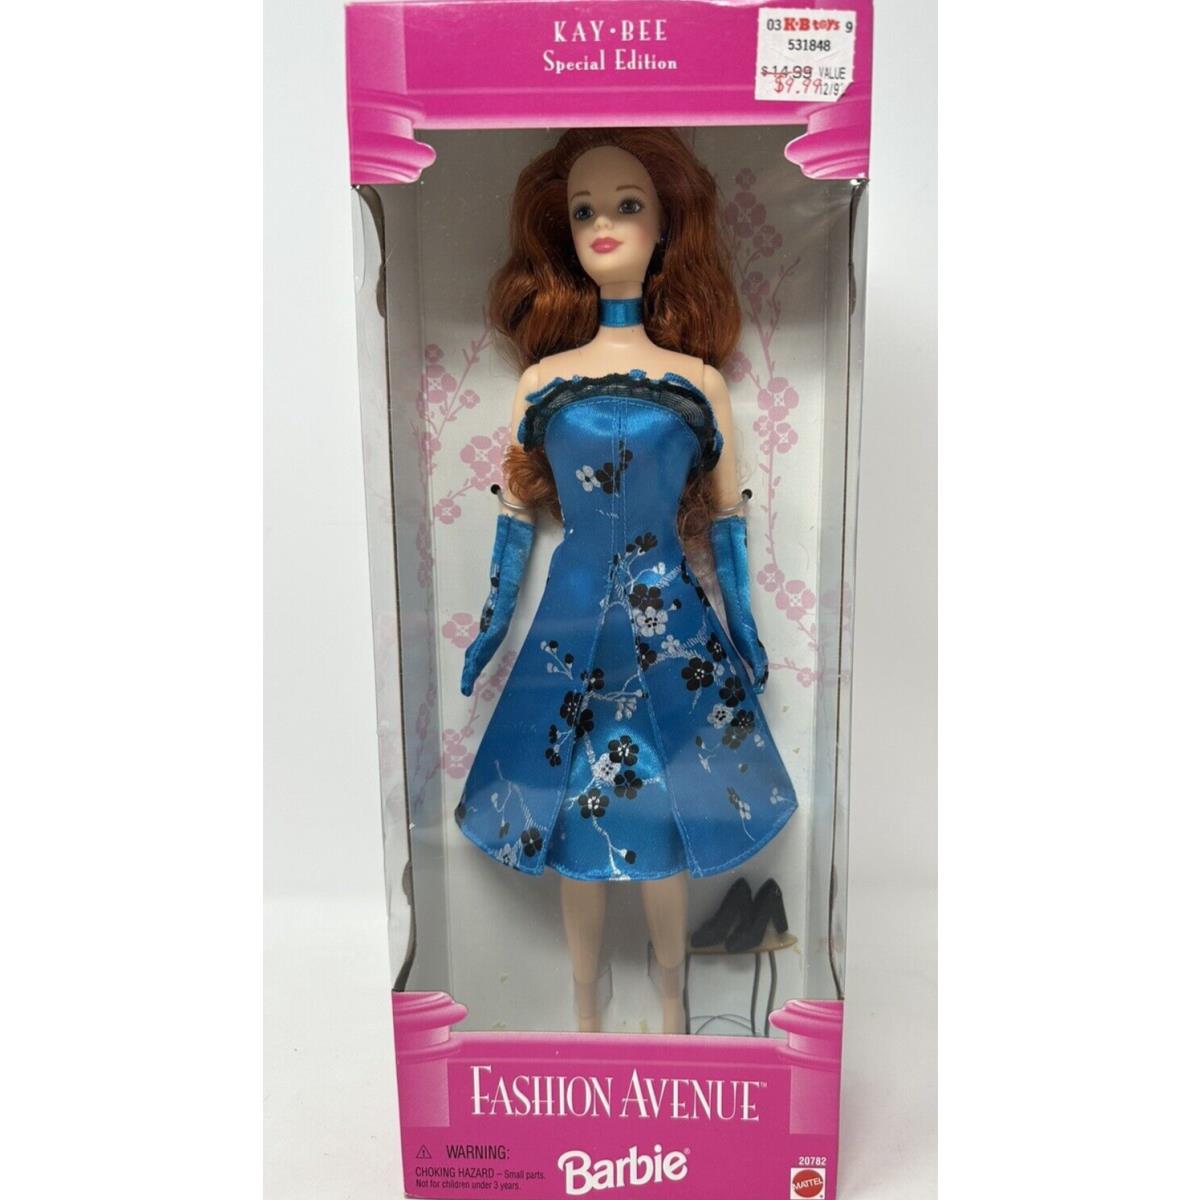 Vintage Mattel 1998 Fashion Avenue Collection Special Edition Kay Bee